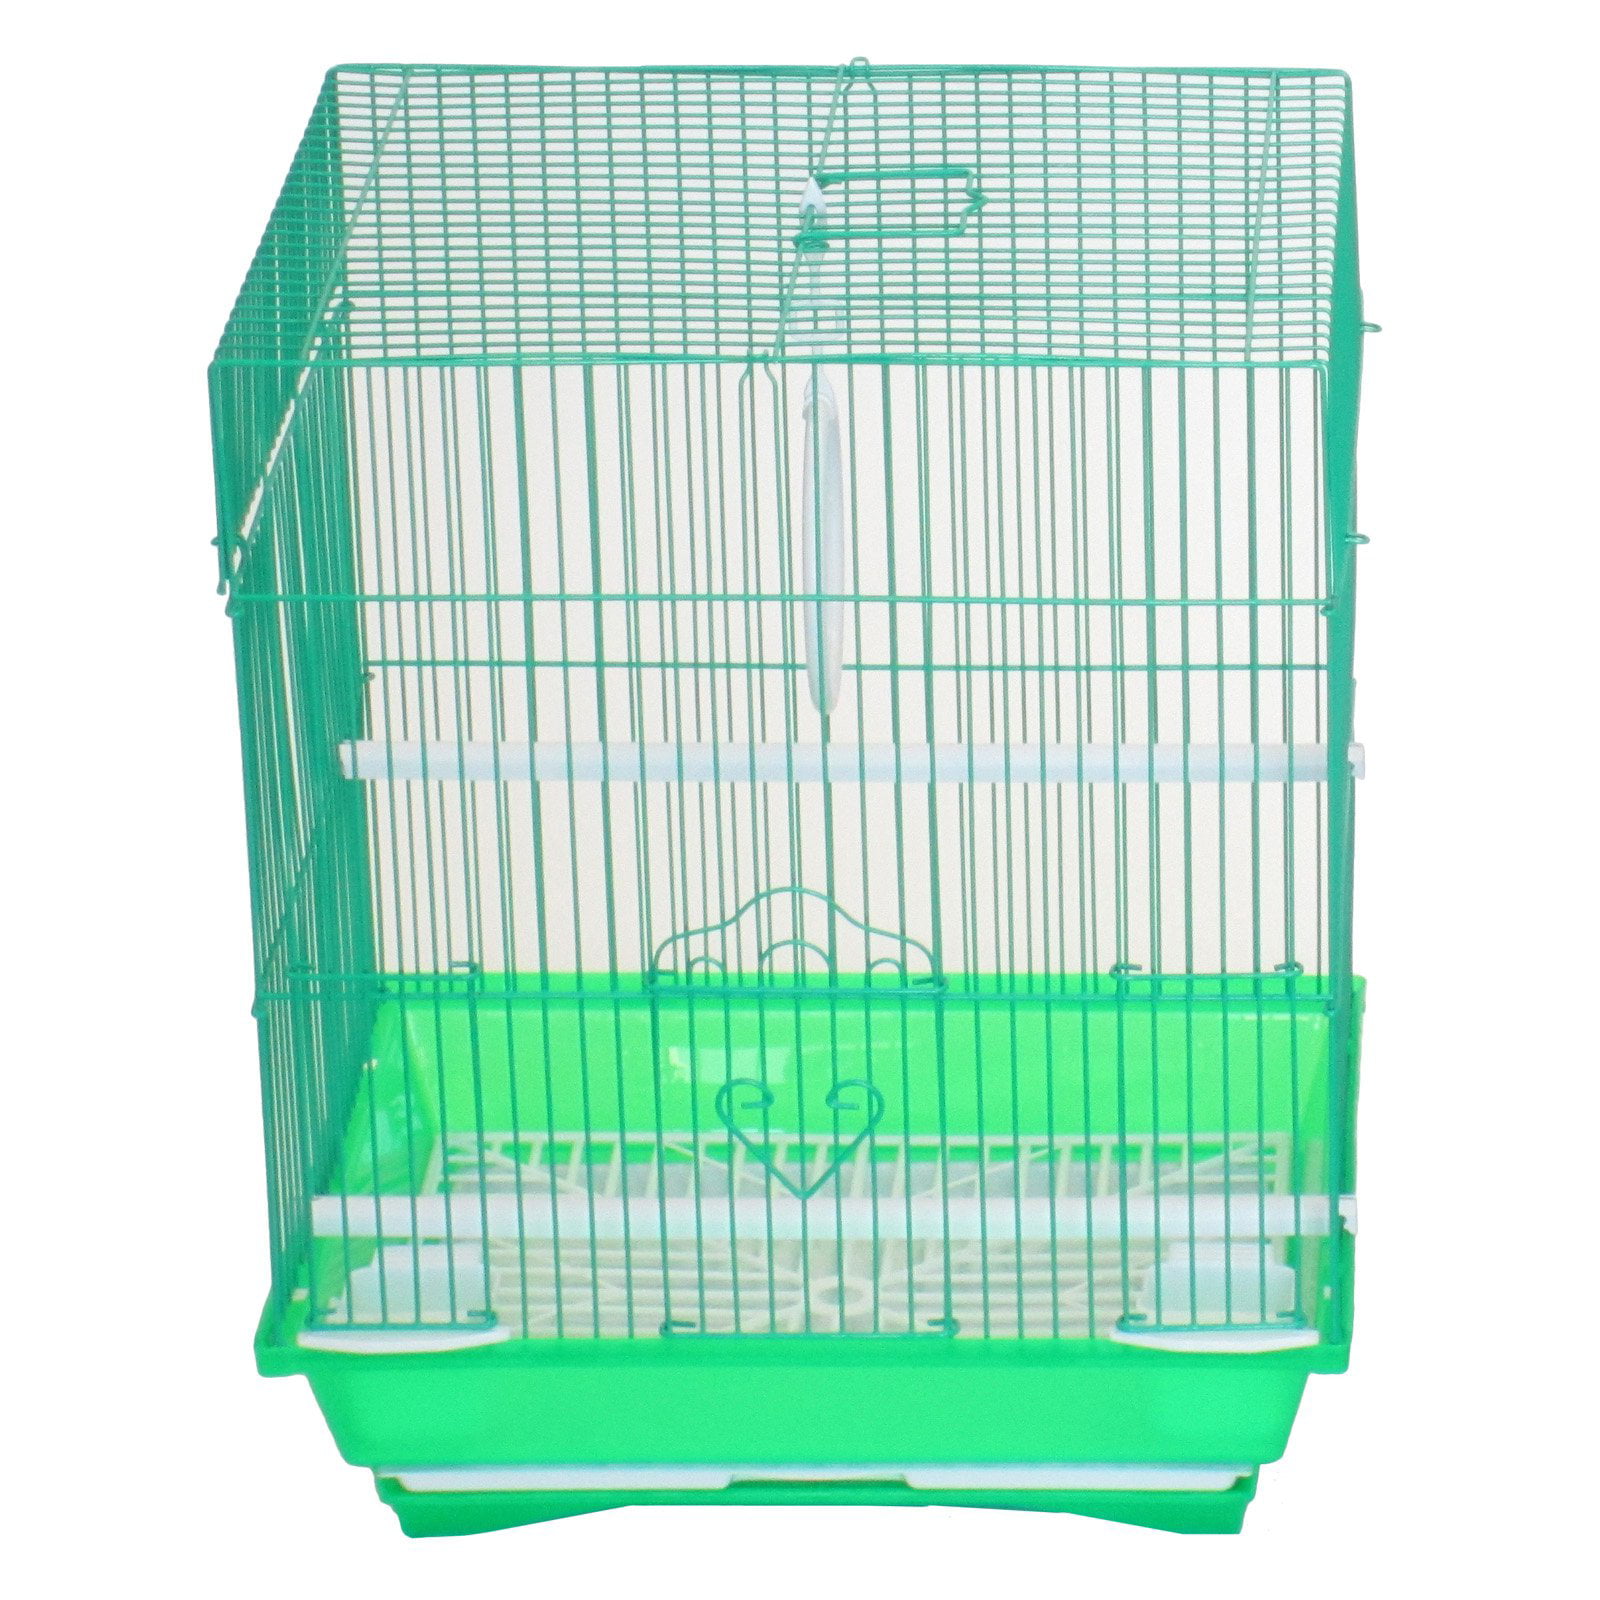 Cage Top. Flat cage